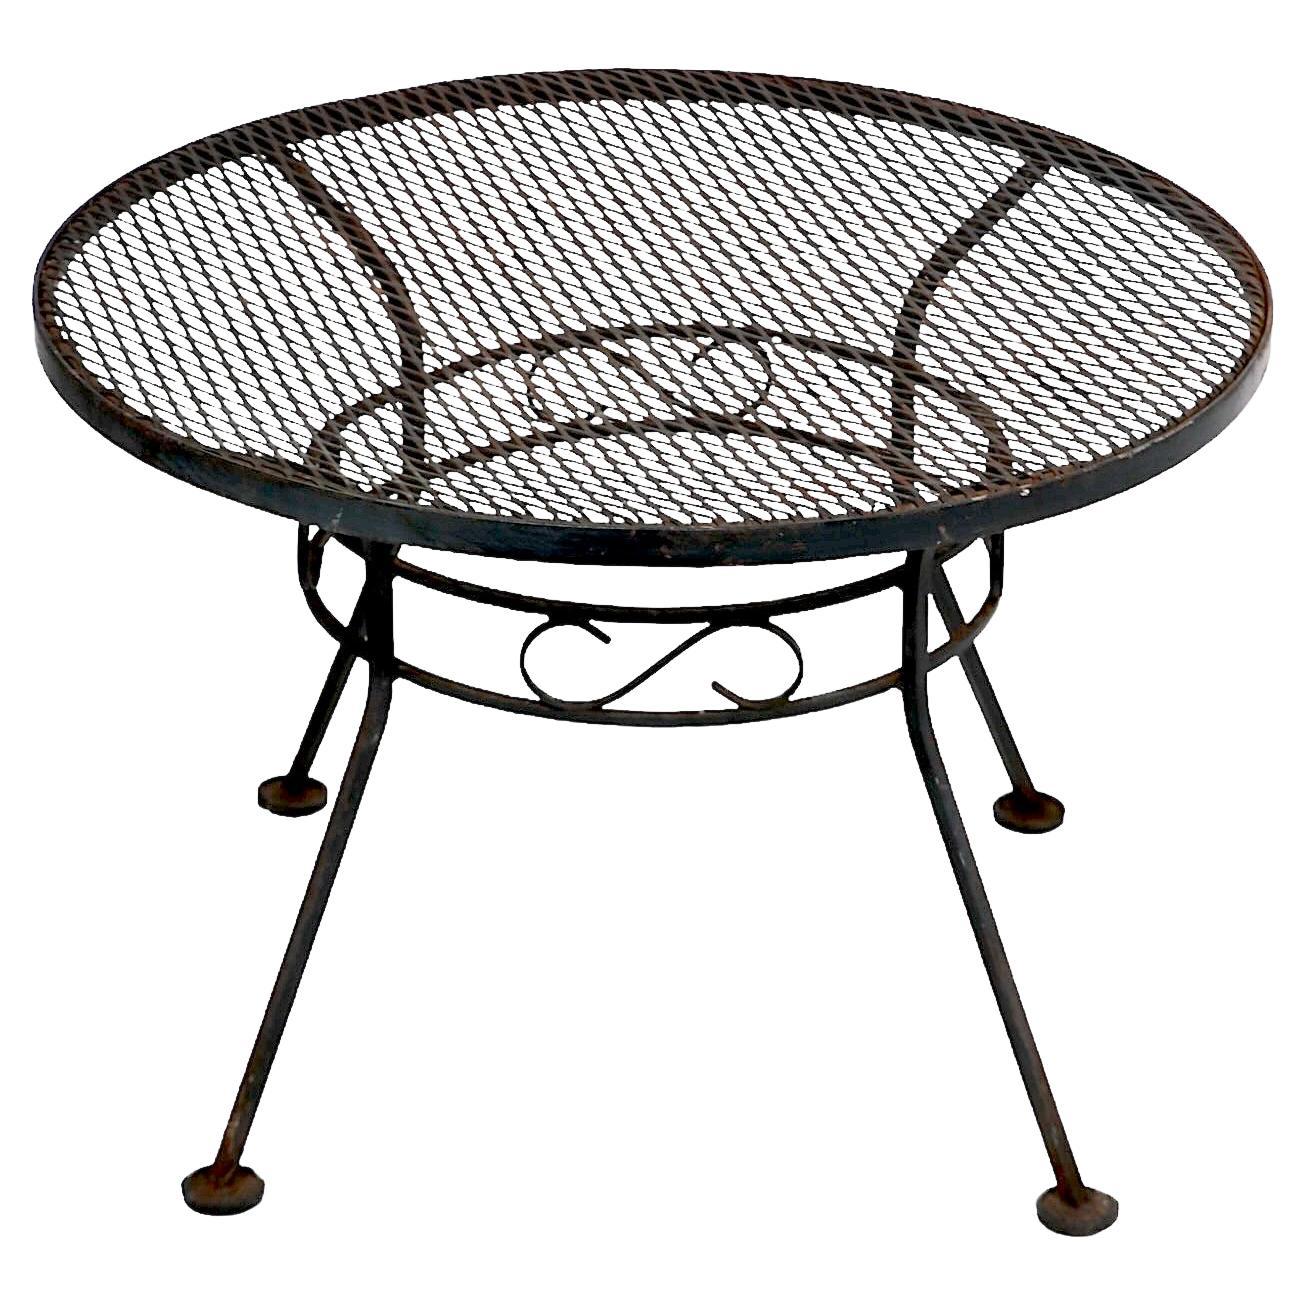  Small Wrought Iron  Garden Patio Poolside Table by Woodard c. 1940/60's